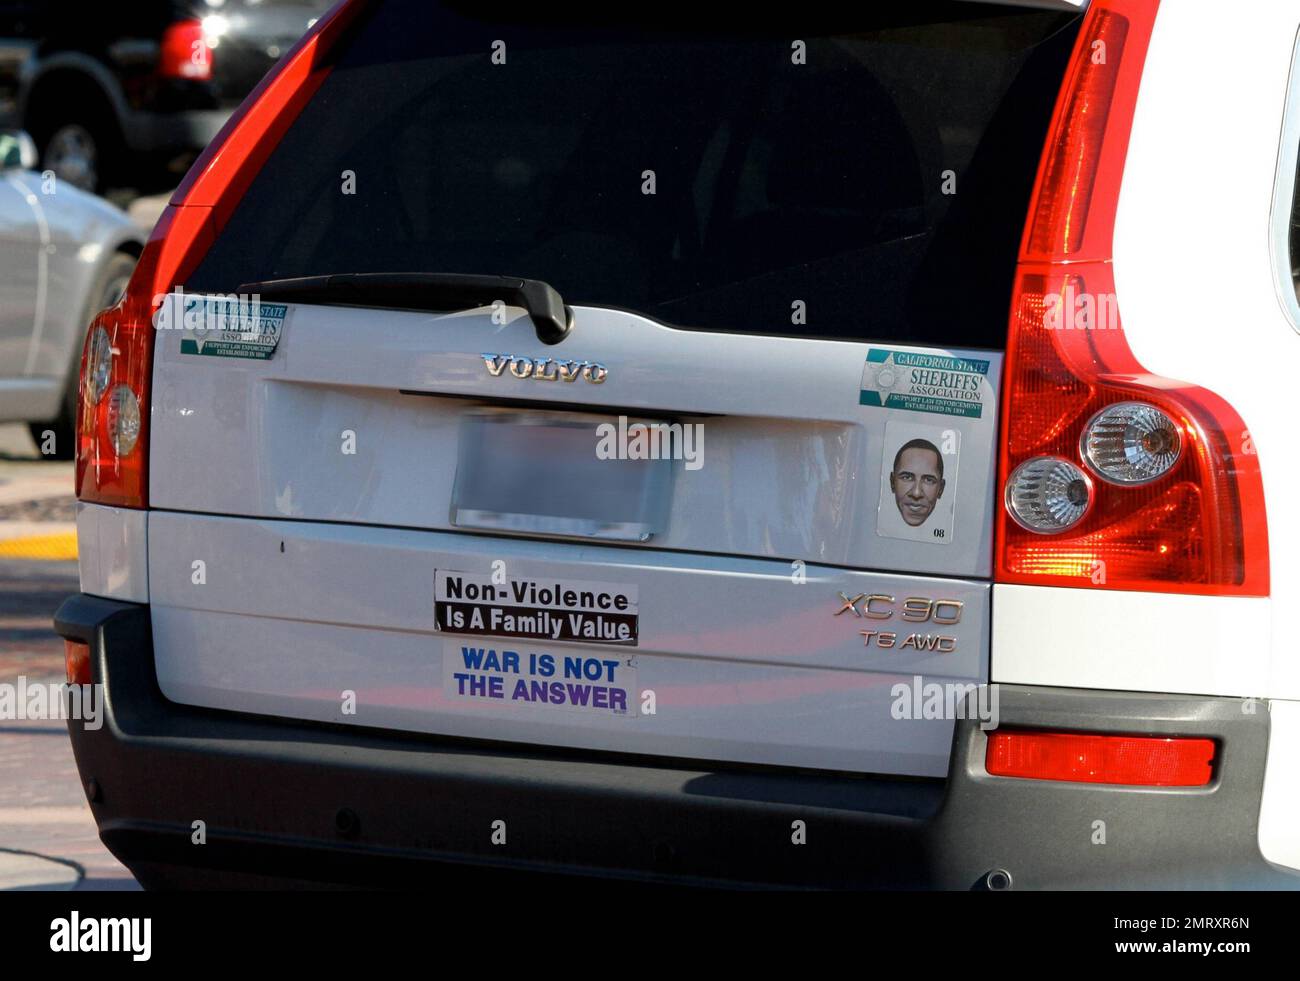 Actor Martin Sheen was seen picking up food to go from Howdy's restaurant in Malibu and driving off in his vehicle which displayed Obama and anti-war bumper stickers. Malibu, CA. 28th July 2012 Stock Photo